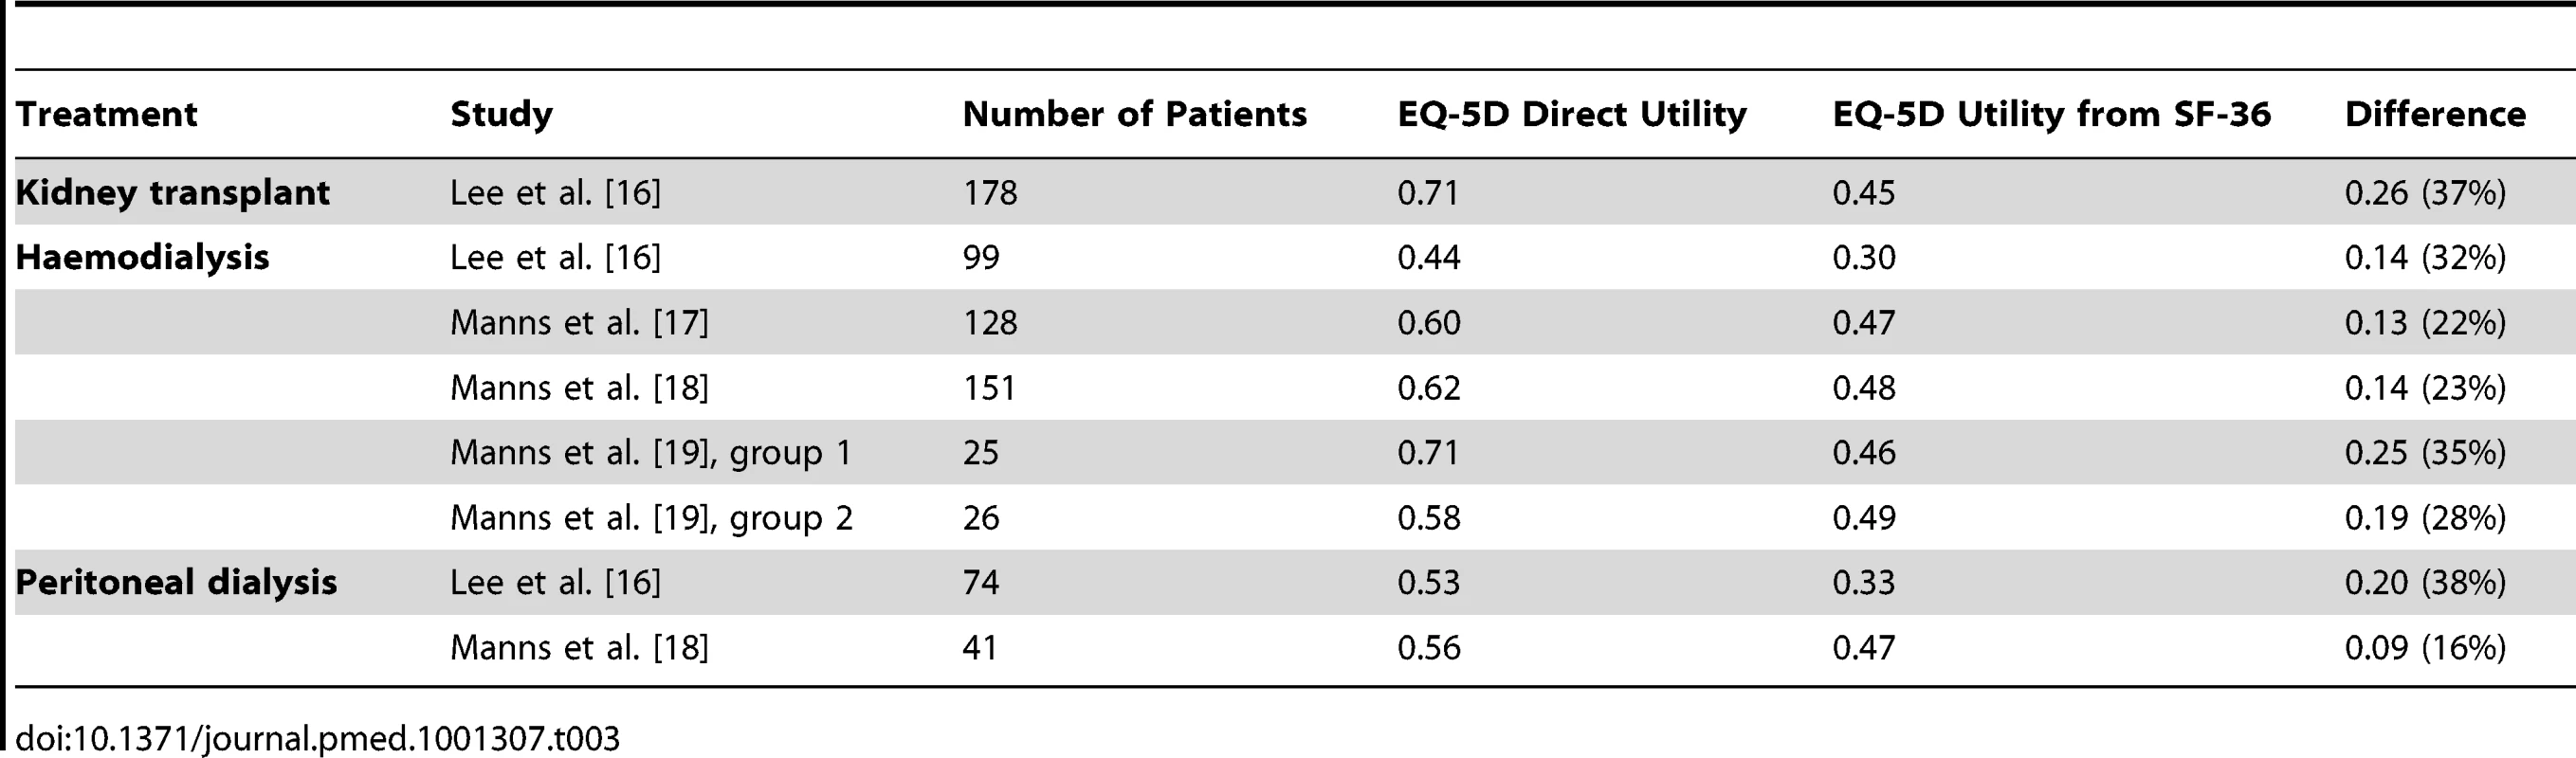 EQ-5D utility estimates reported directly and calculated from SF-36 for the same patient population.